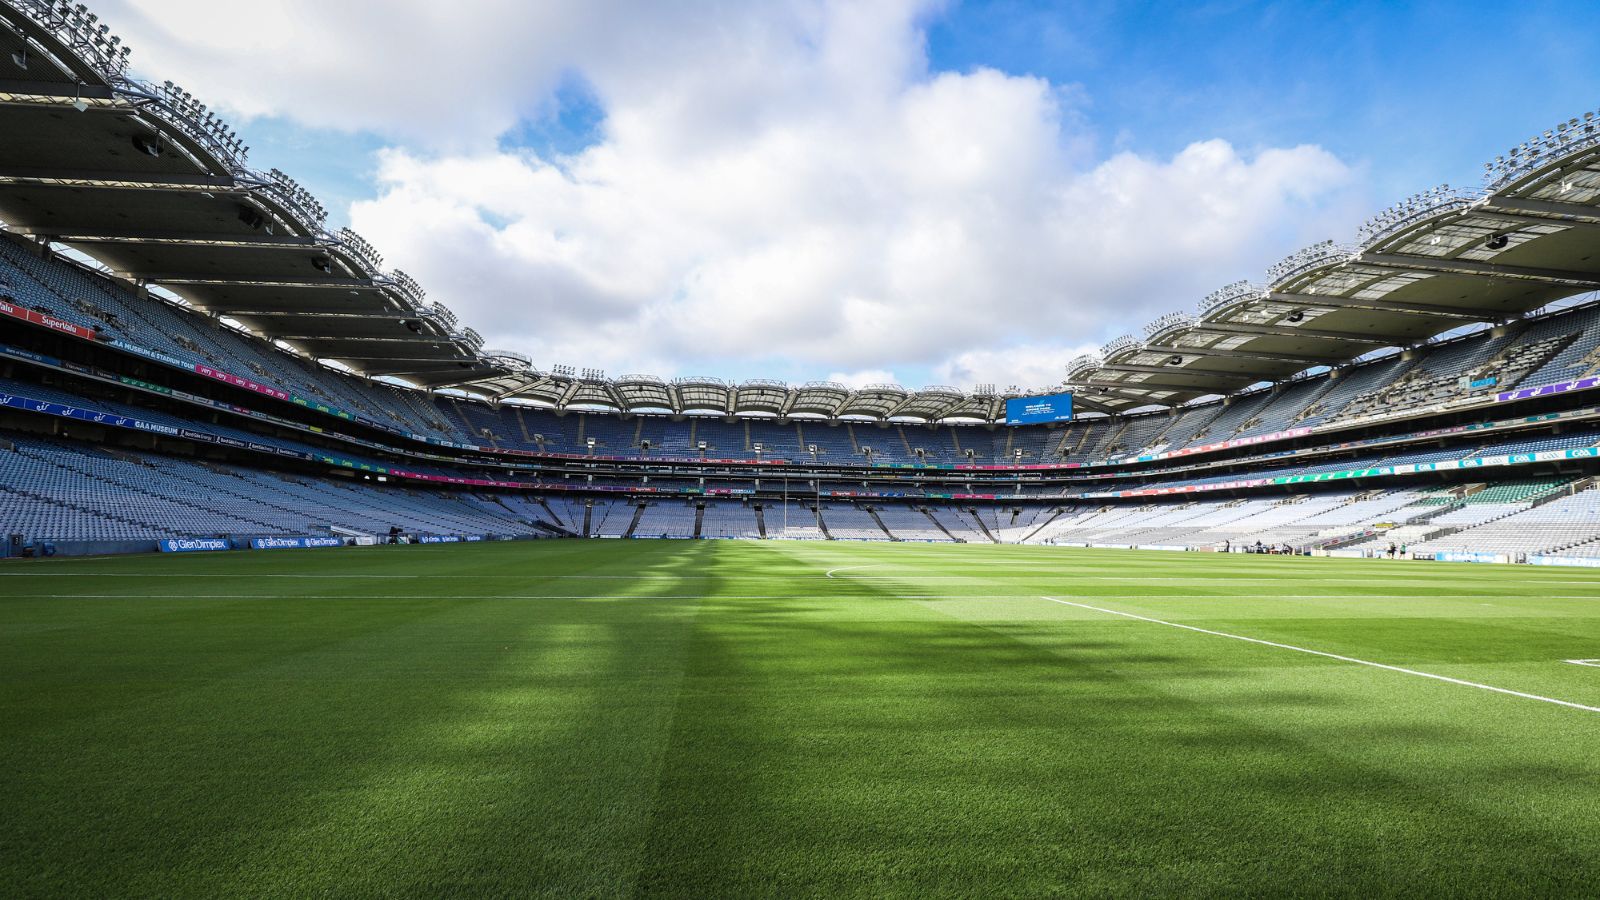 <p>Another popular thing to do in Dublin is watch a game of hurling or Gaelic football at Croke Park. The self-proclaimed home of Ireland’s Gaelic Games, Croke Park offers a uniquely Irish experience that any sports fan will appreciate.</p>